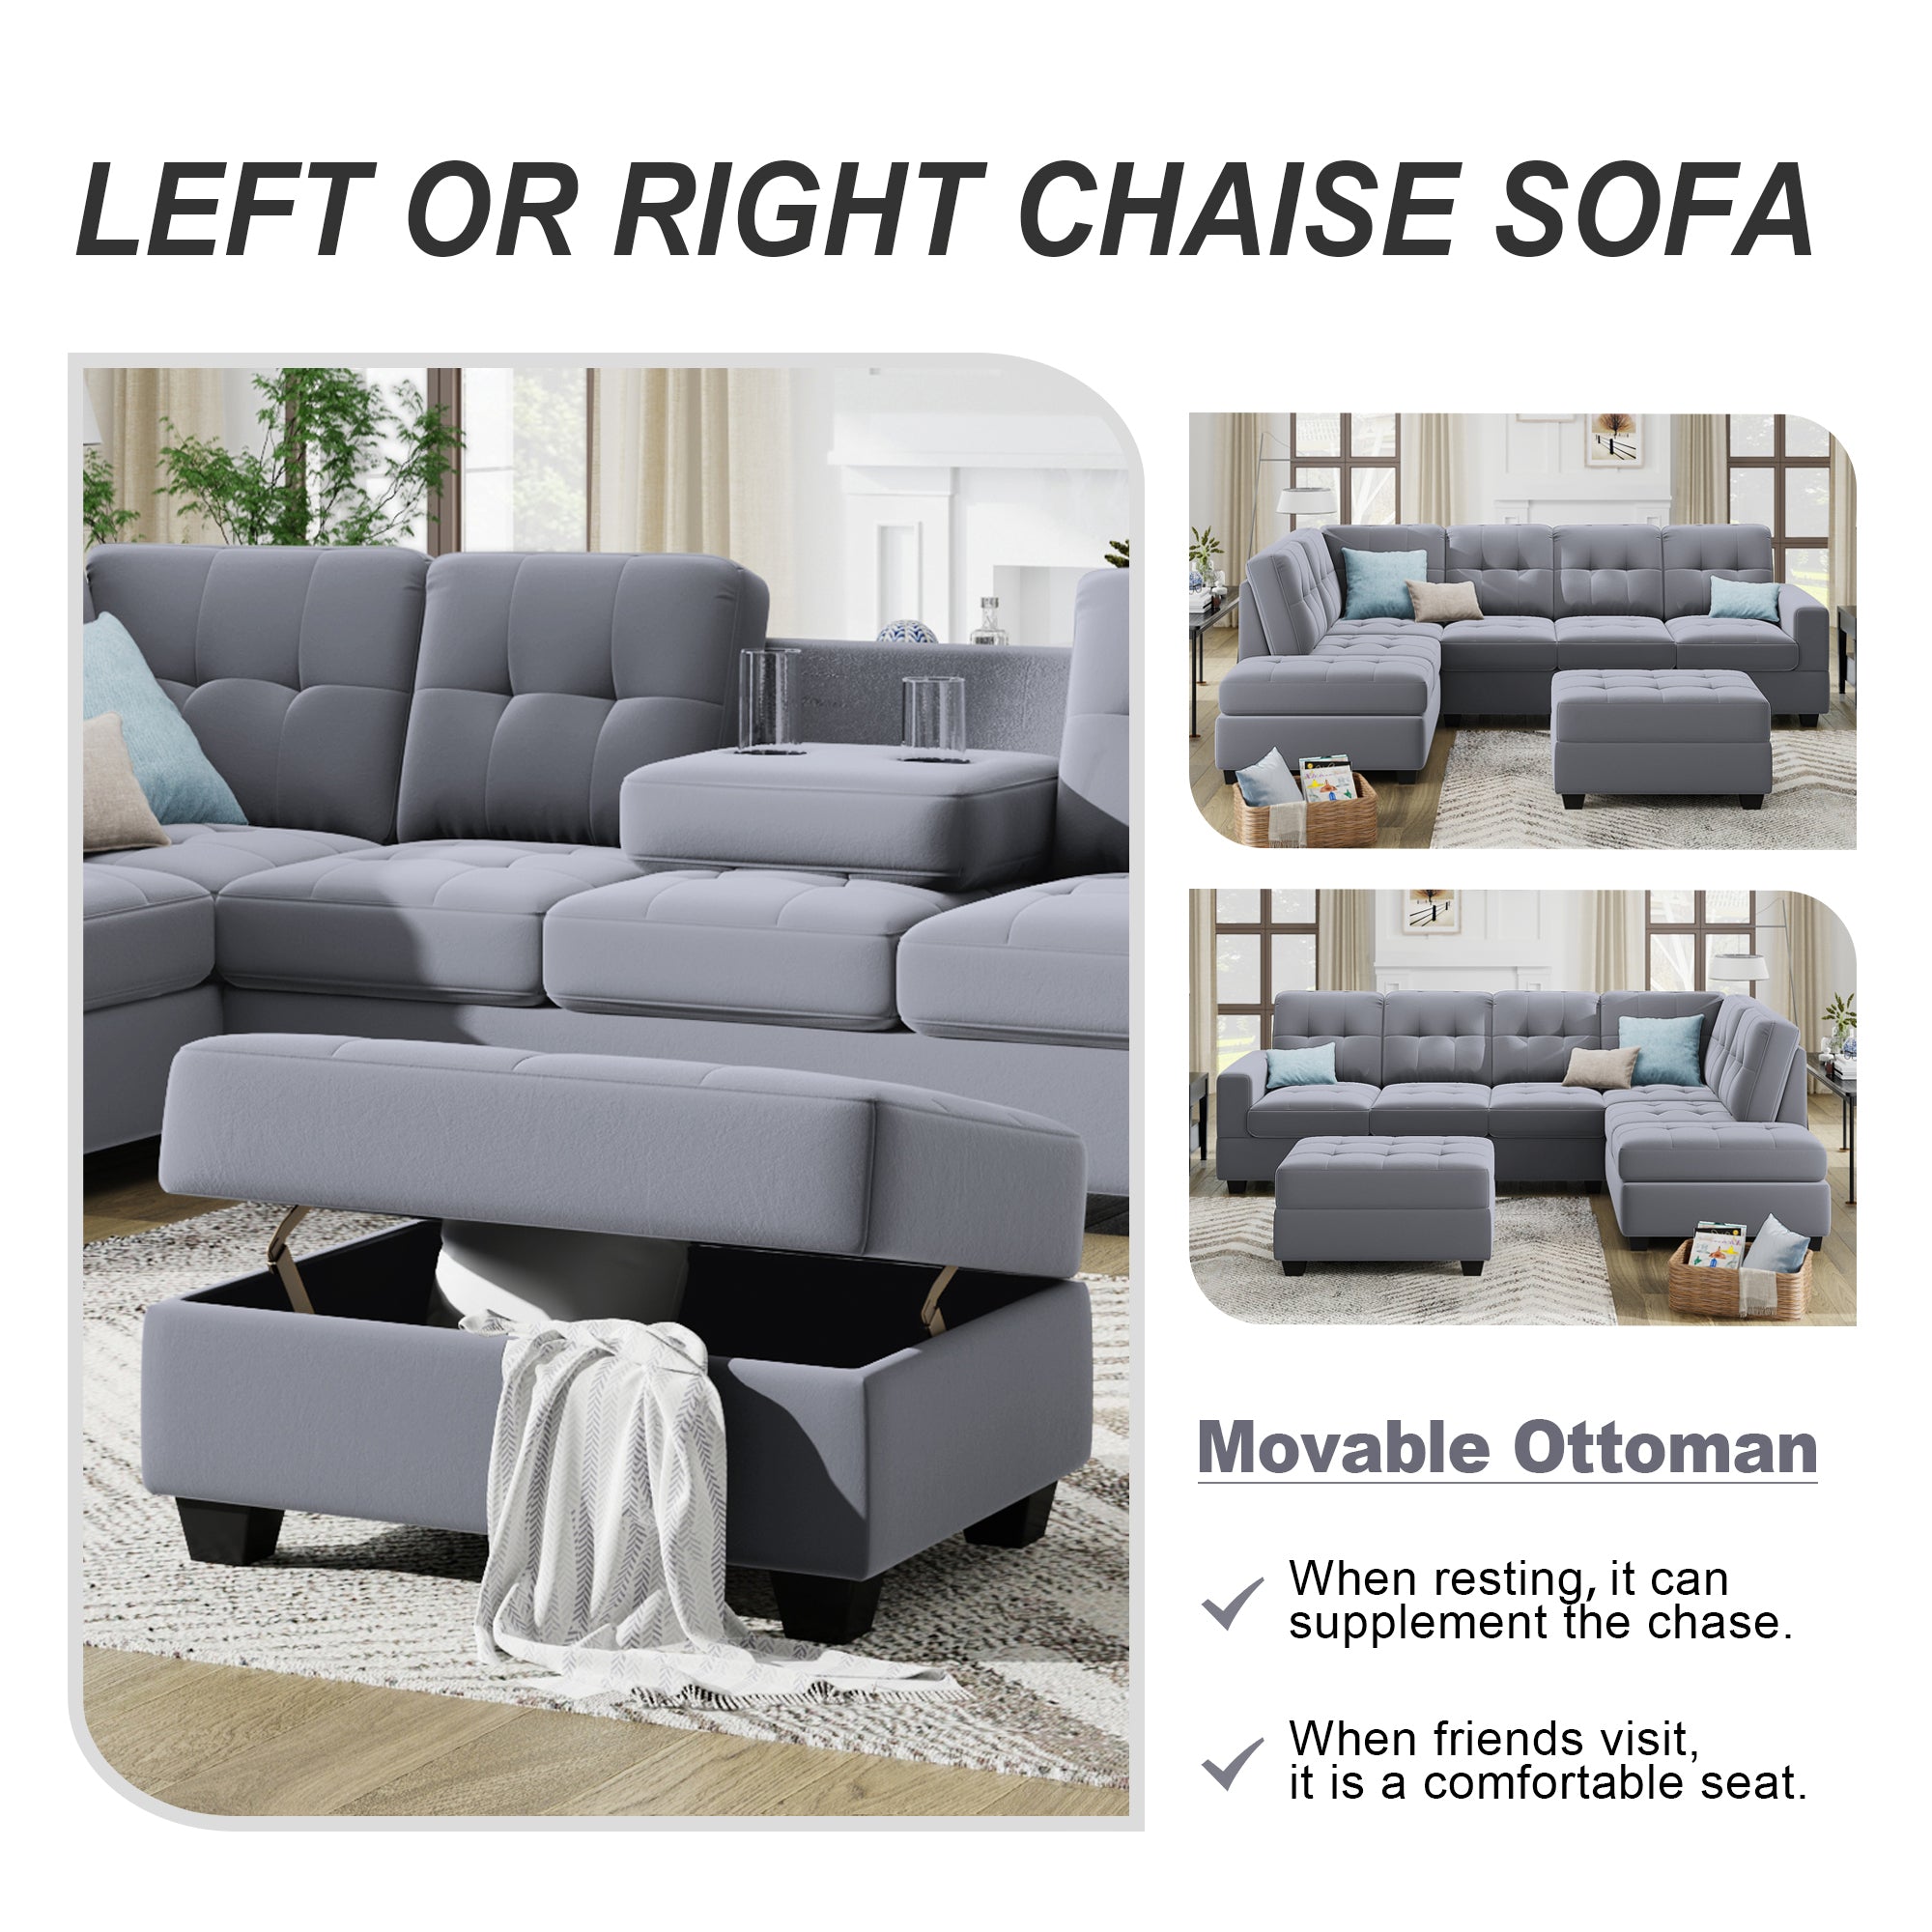 Sectional Sofa with Reversible Chaise Lounge